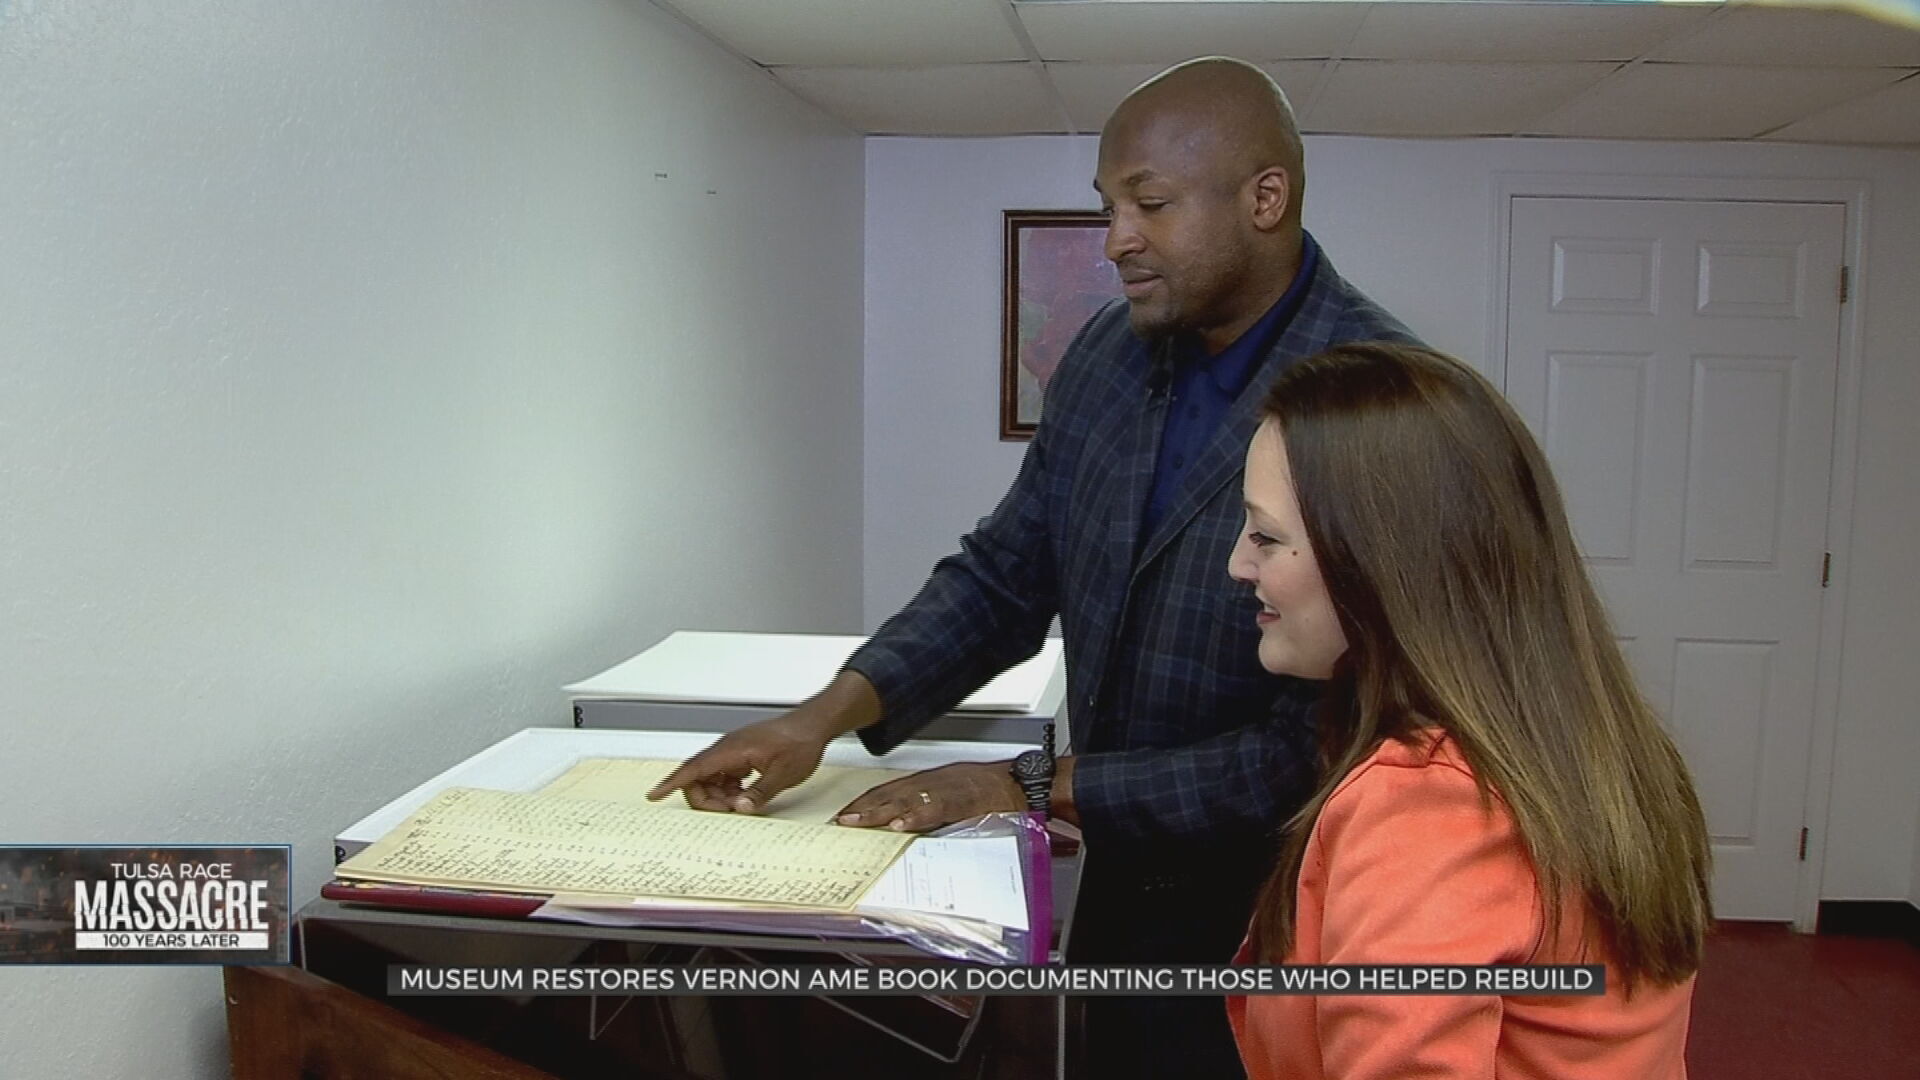 Museum Of The Bible Restores, Creates Replica Of Vernon AME Church ‘Book Of Redemption’  